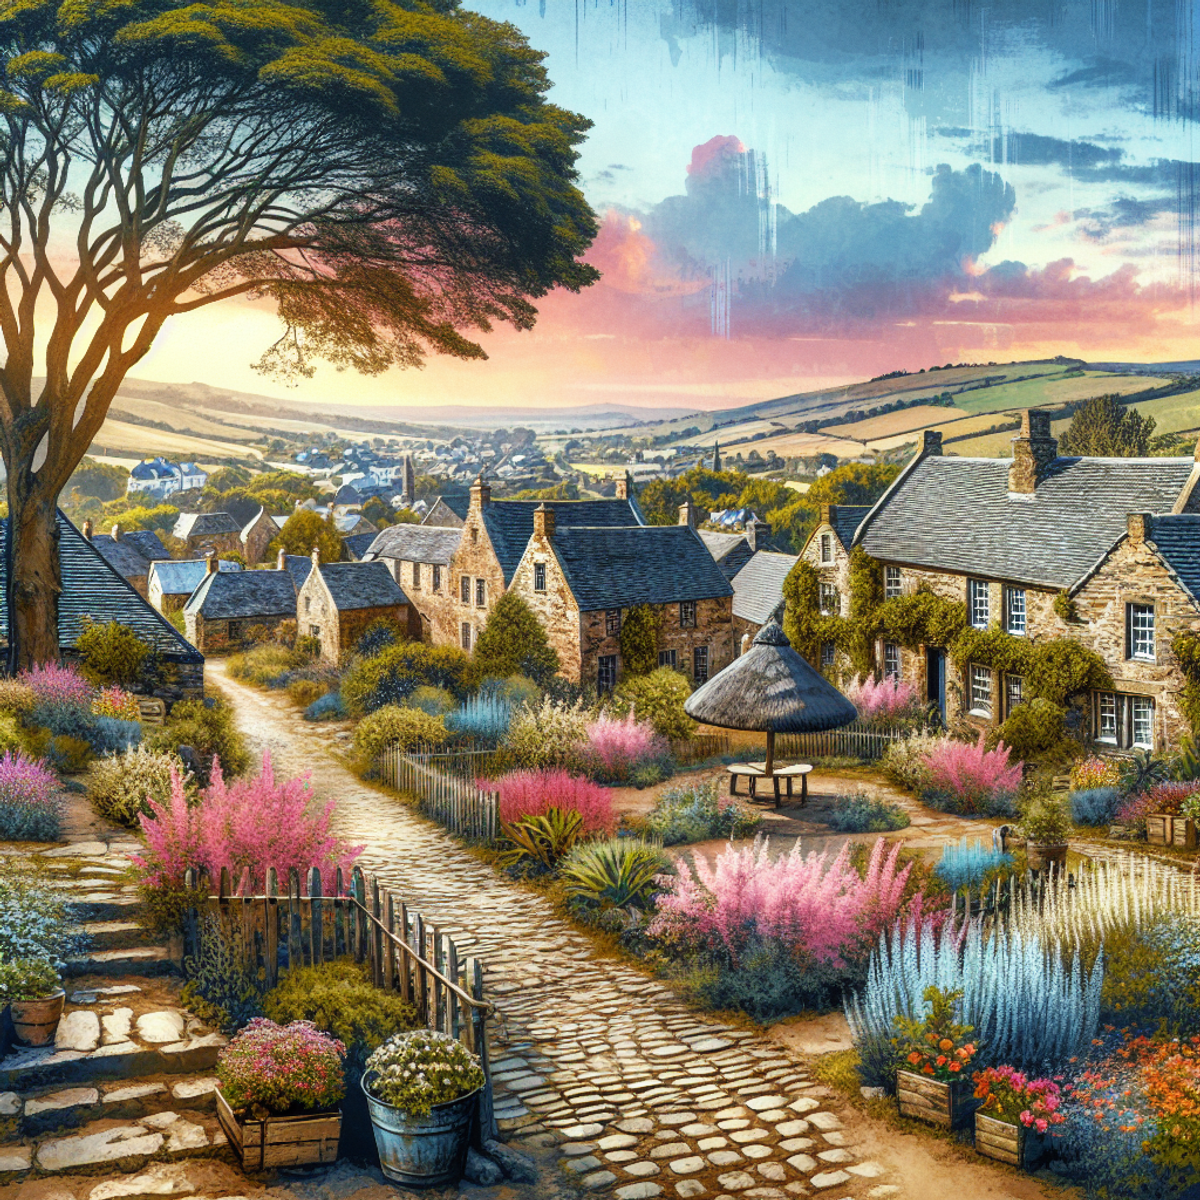 A serene village with cobblestone paths, stone houses, colorful gardens, and a vibrant sunset over the rolling countryside.